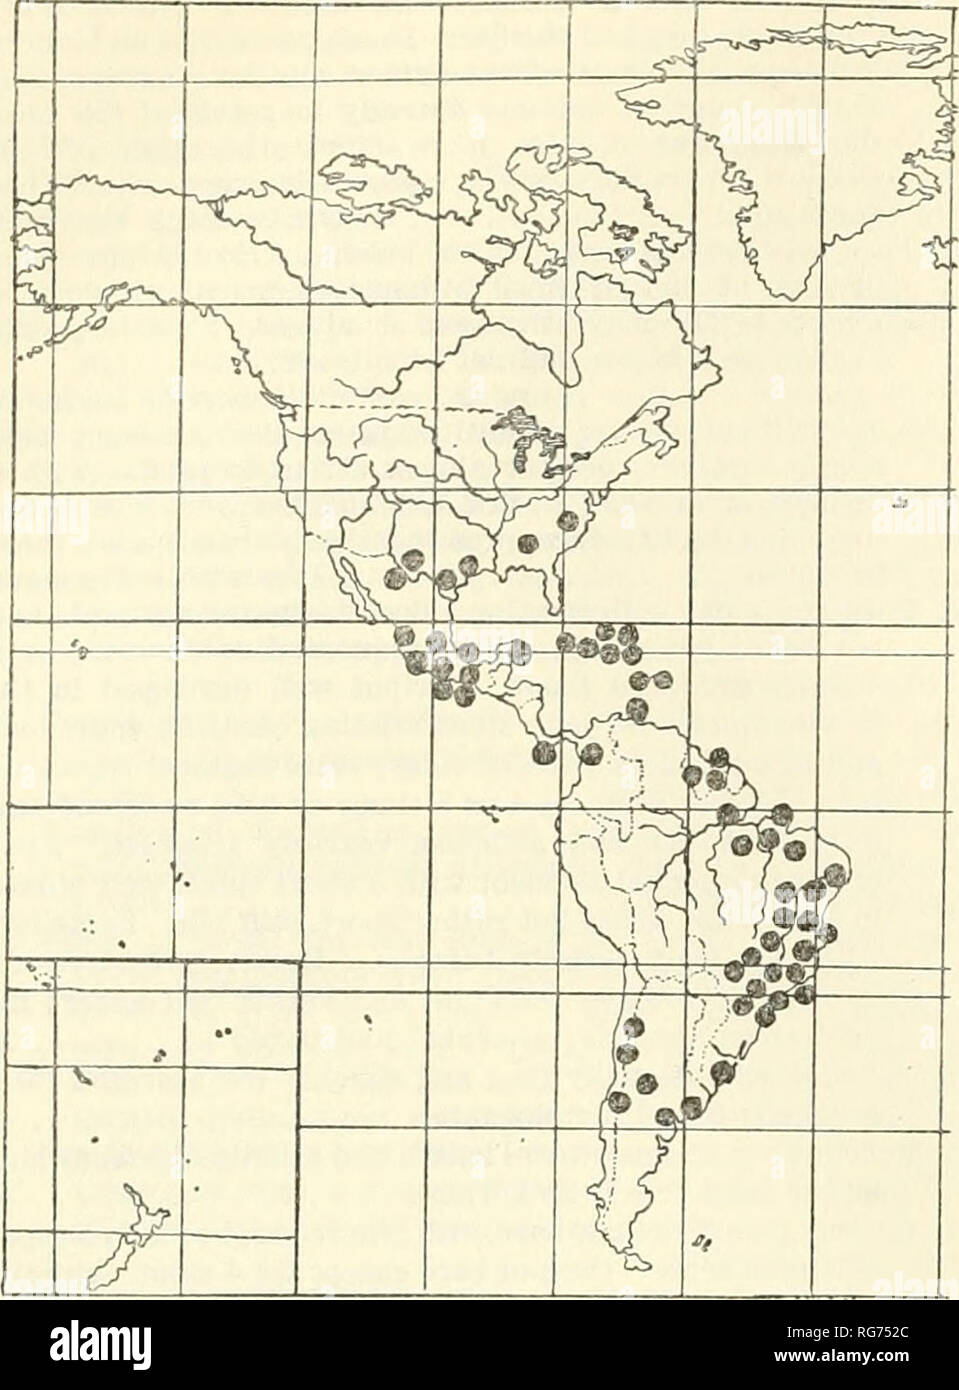 . Bulletin - United States National Museum. Science. 372 UNITED STATES NATIONAL MUSEUM BULLETIN 224. Text-Figure 26.—Pattern of distribution of the genus Atomosia Macquart. Genus Atomosia Macquart Figuees 223, 229, 637,1309,1318, 2110, 2121, 2122,2123, 2153, 2156 Atomosia Macquart, Dipteres exotiques, vol. 1, pt. 2, p. 73, 1838. Type of genus: Atomosia incisuralis Macquart, 1838. Designed by Coquillett, 1910, the fourth of 6 species. Cormanste Walker, Insecta Saundersiana, vol. 1, pt. 2, p. 154, 1S51. Type of genus: by monotypy. Cormansis halictides Walker, 1S51, Small, short and robust flies  Stock Photo